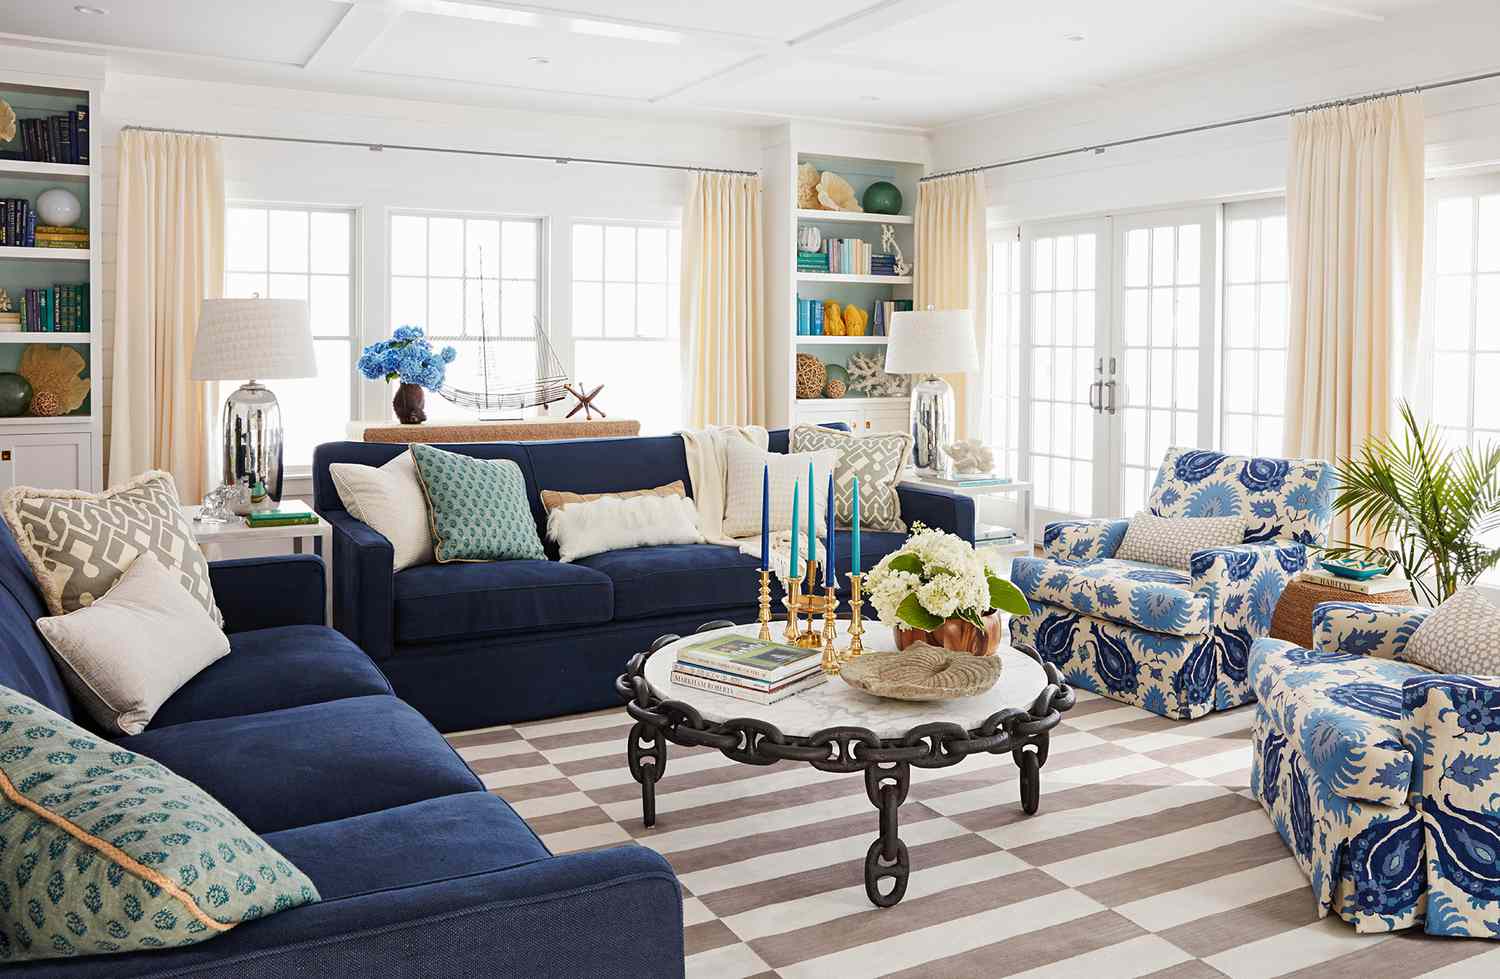 Take A Tour Of This Colorful Cape Cod Home Better Homes Gardens